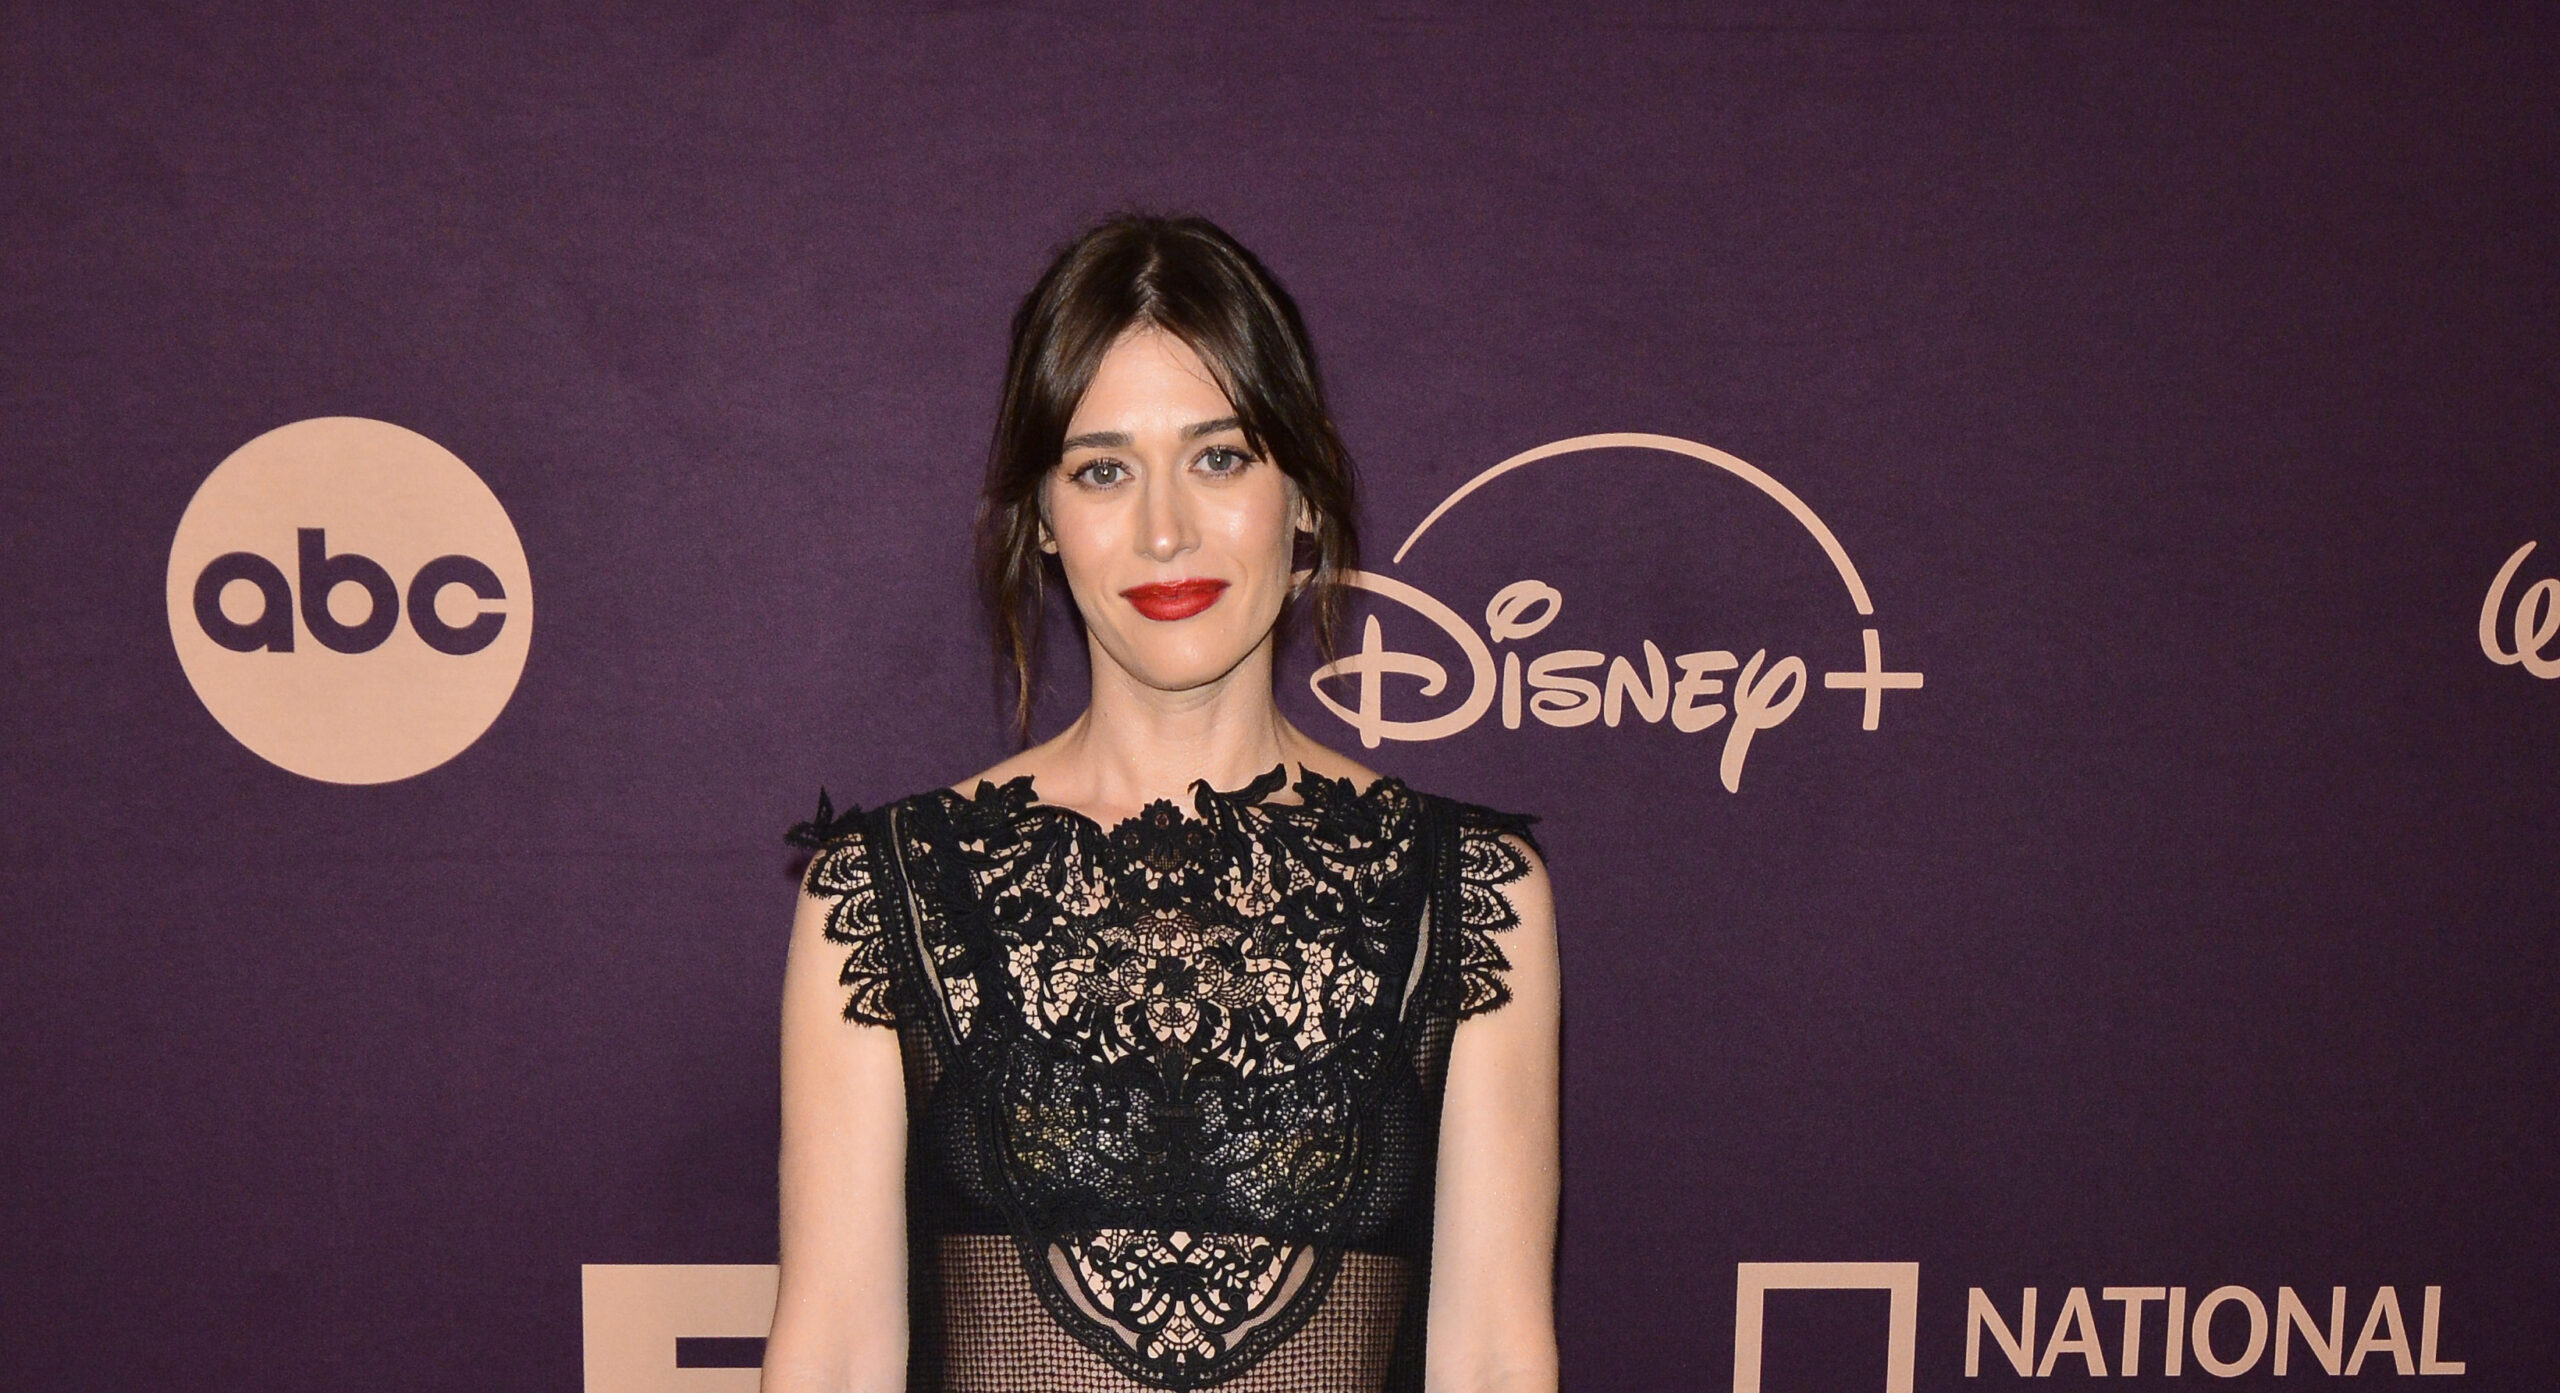 Lizzy Caplan at Disney's Emmy Awards Party in a Dior black lace gown.